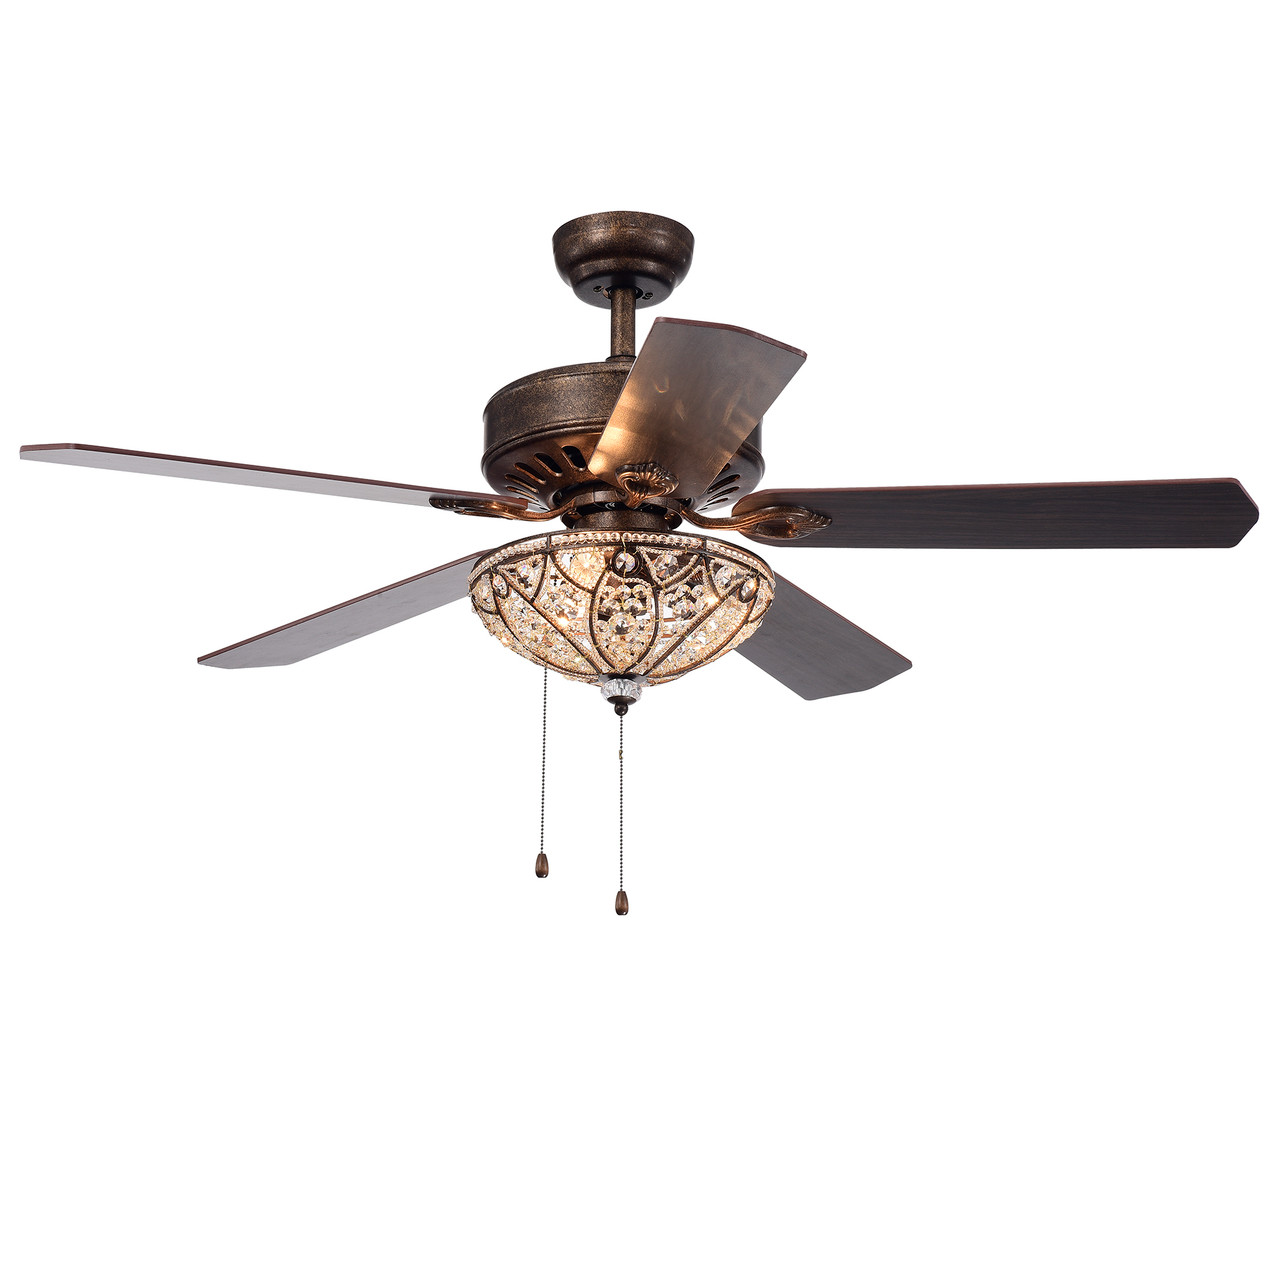 WAREHOUSE OF TIFFANY'S CFL-8353RB Gliska 52 in. 3-Light Indoor Bronze Finish Hand Pull Chain Ceiling Fan with Light Kit